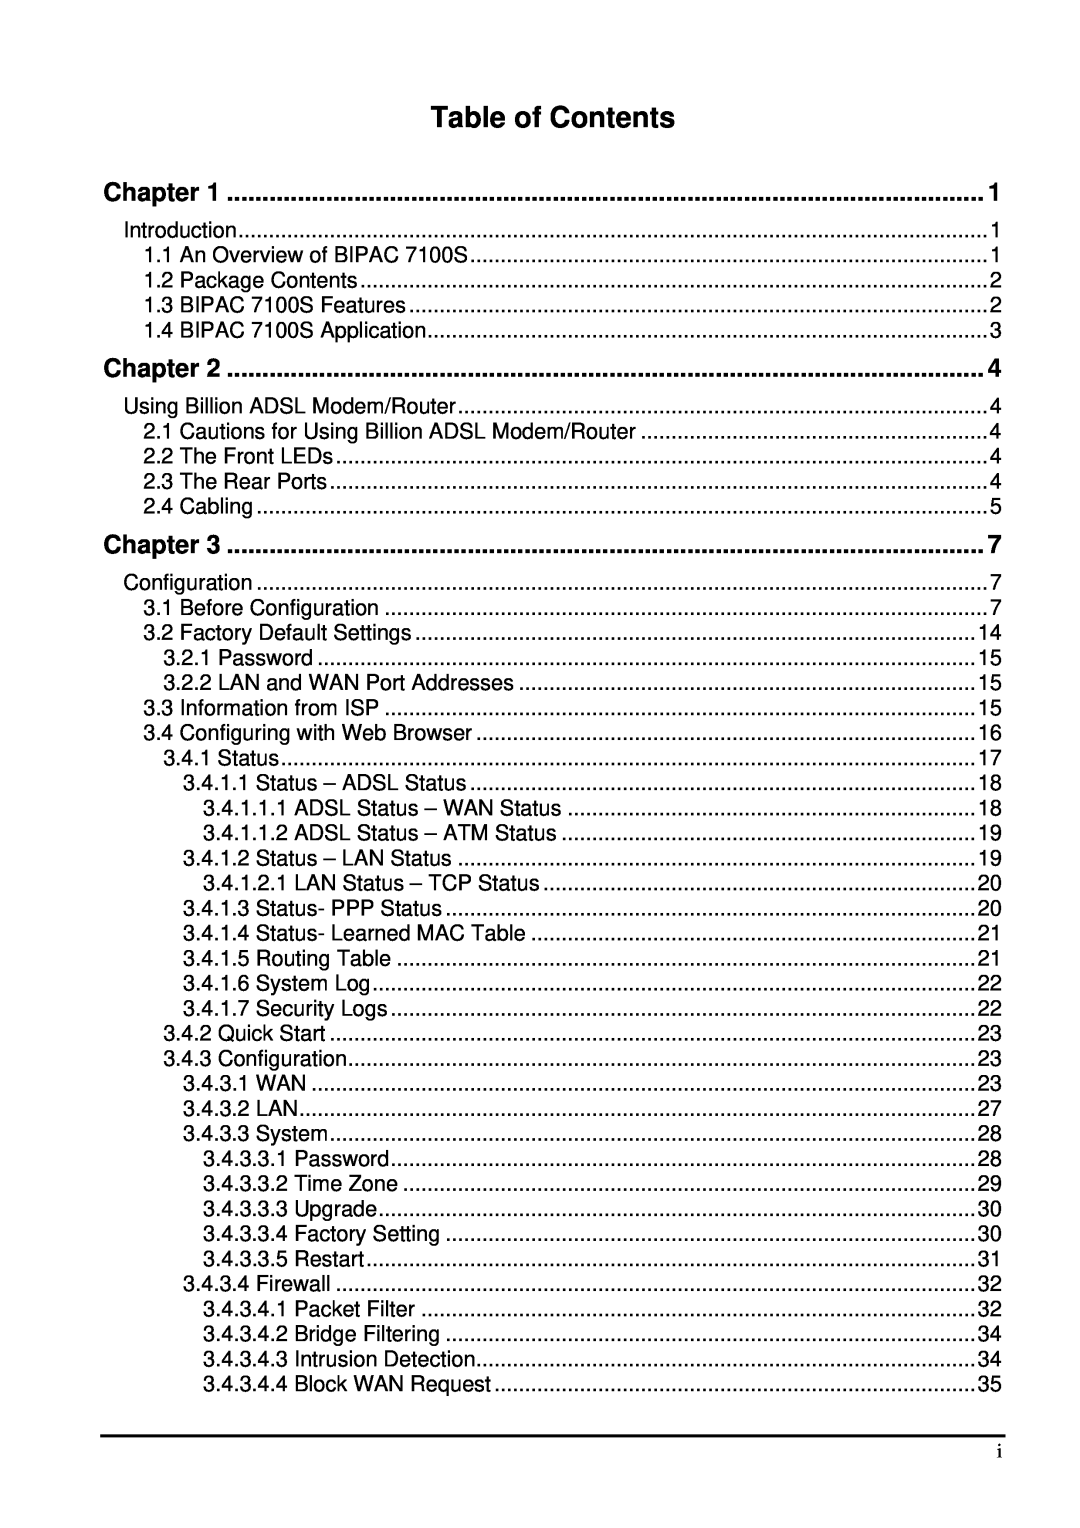 Billion Electric Company 7100S user manual Table of Contents, Chapter 